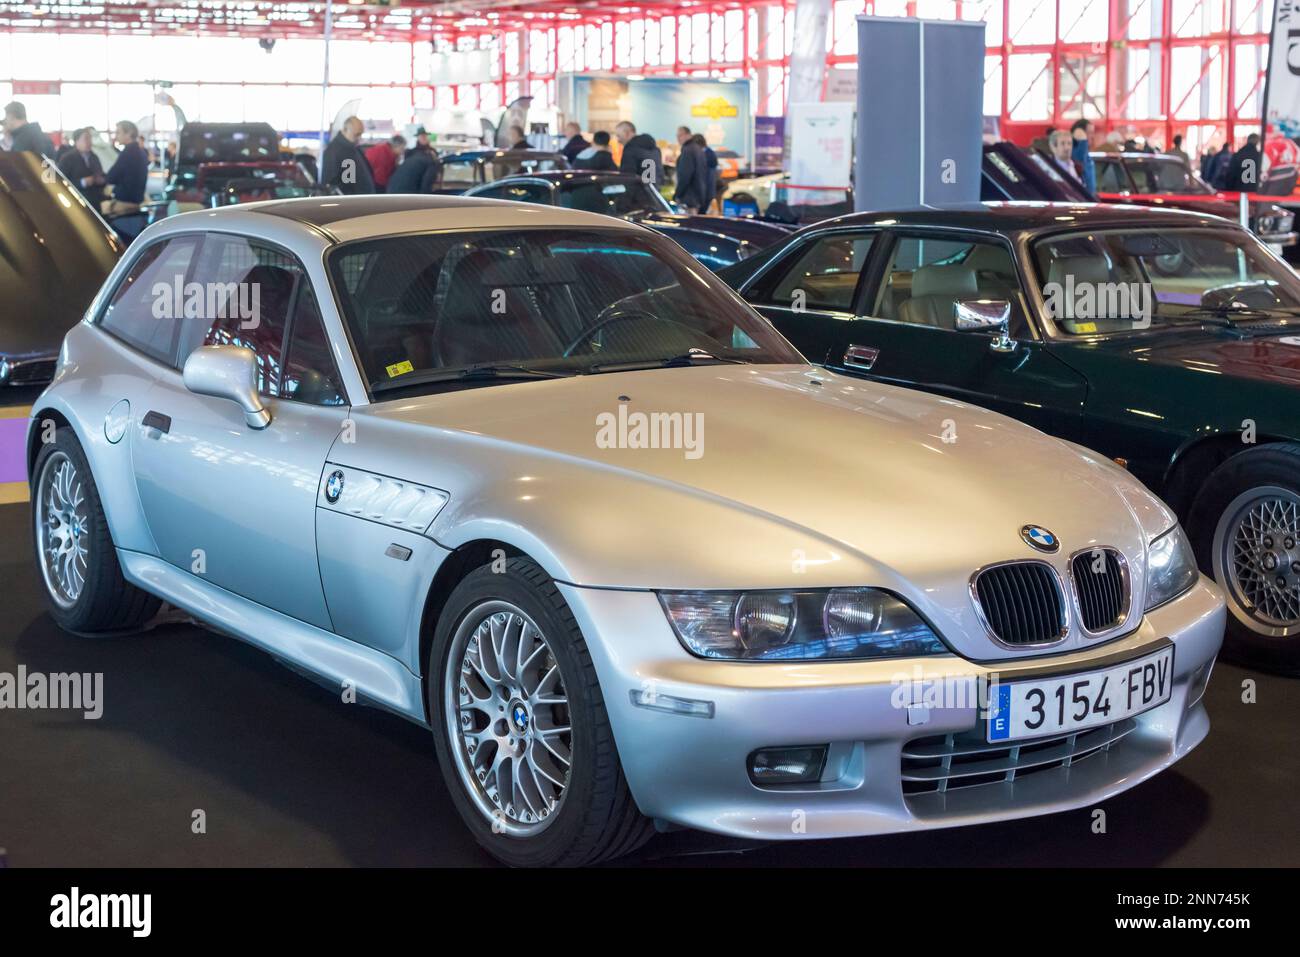 BMW sports car at the ClassicMadrid exhibition of classic and vintage cars opened in Madrid and organised by the Salón Internacional del Vehículo Clás Stock Photo